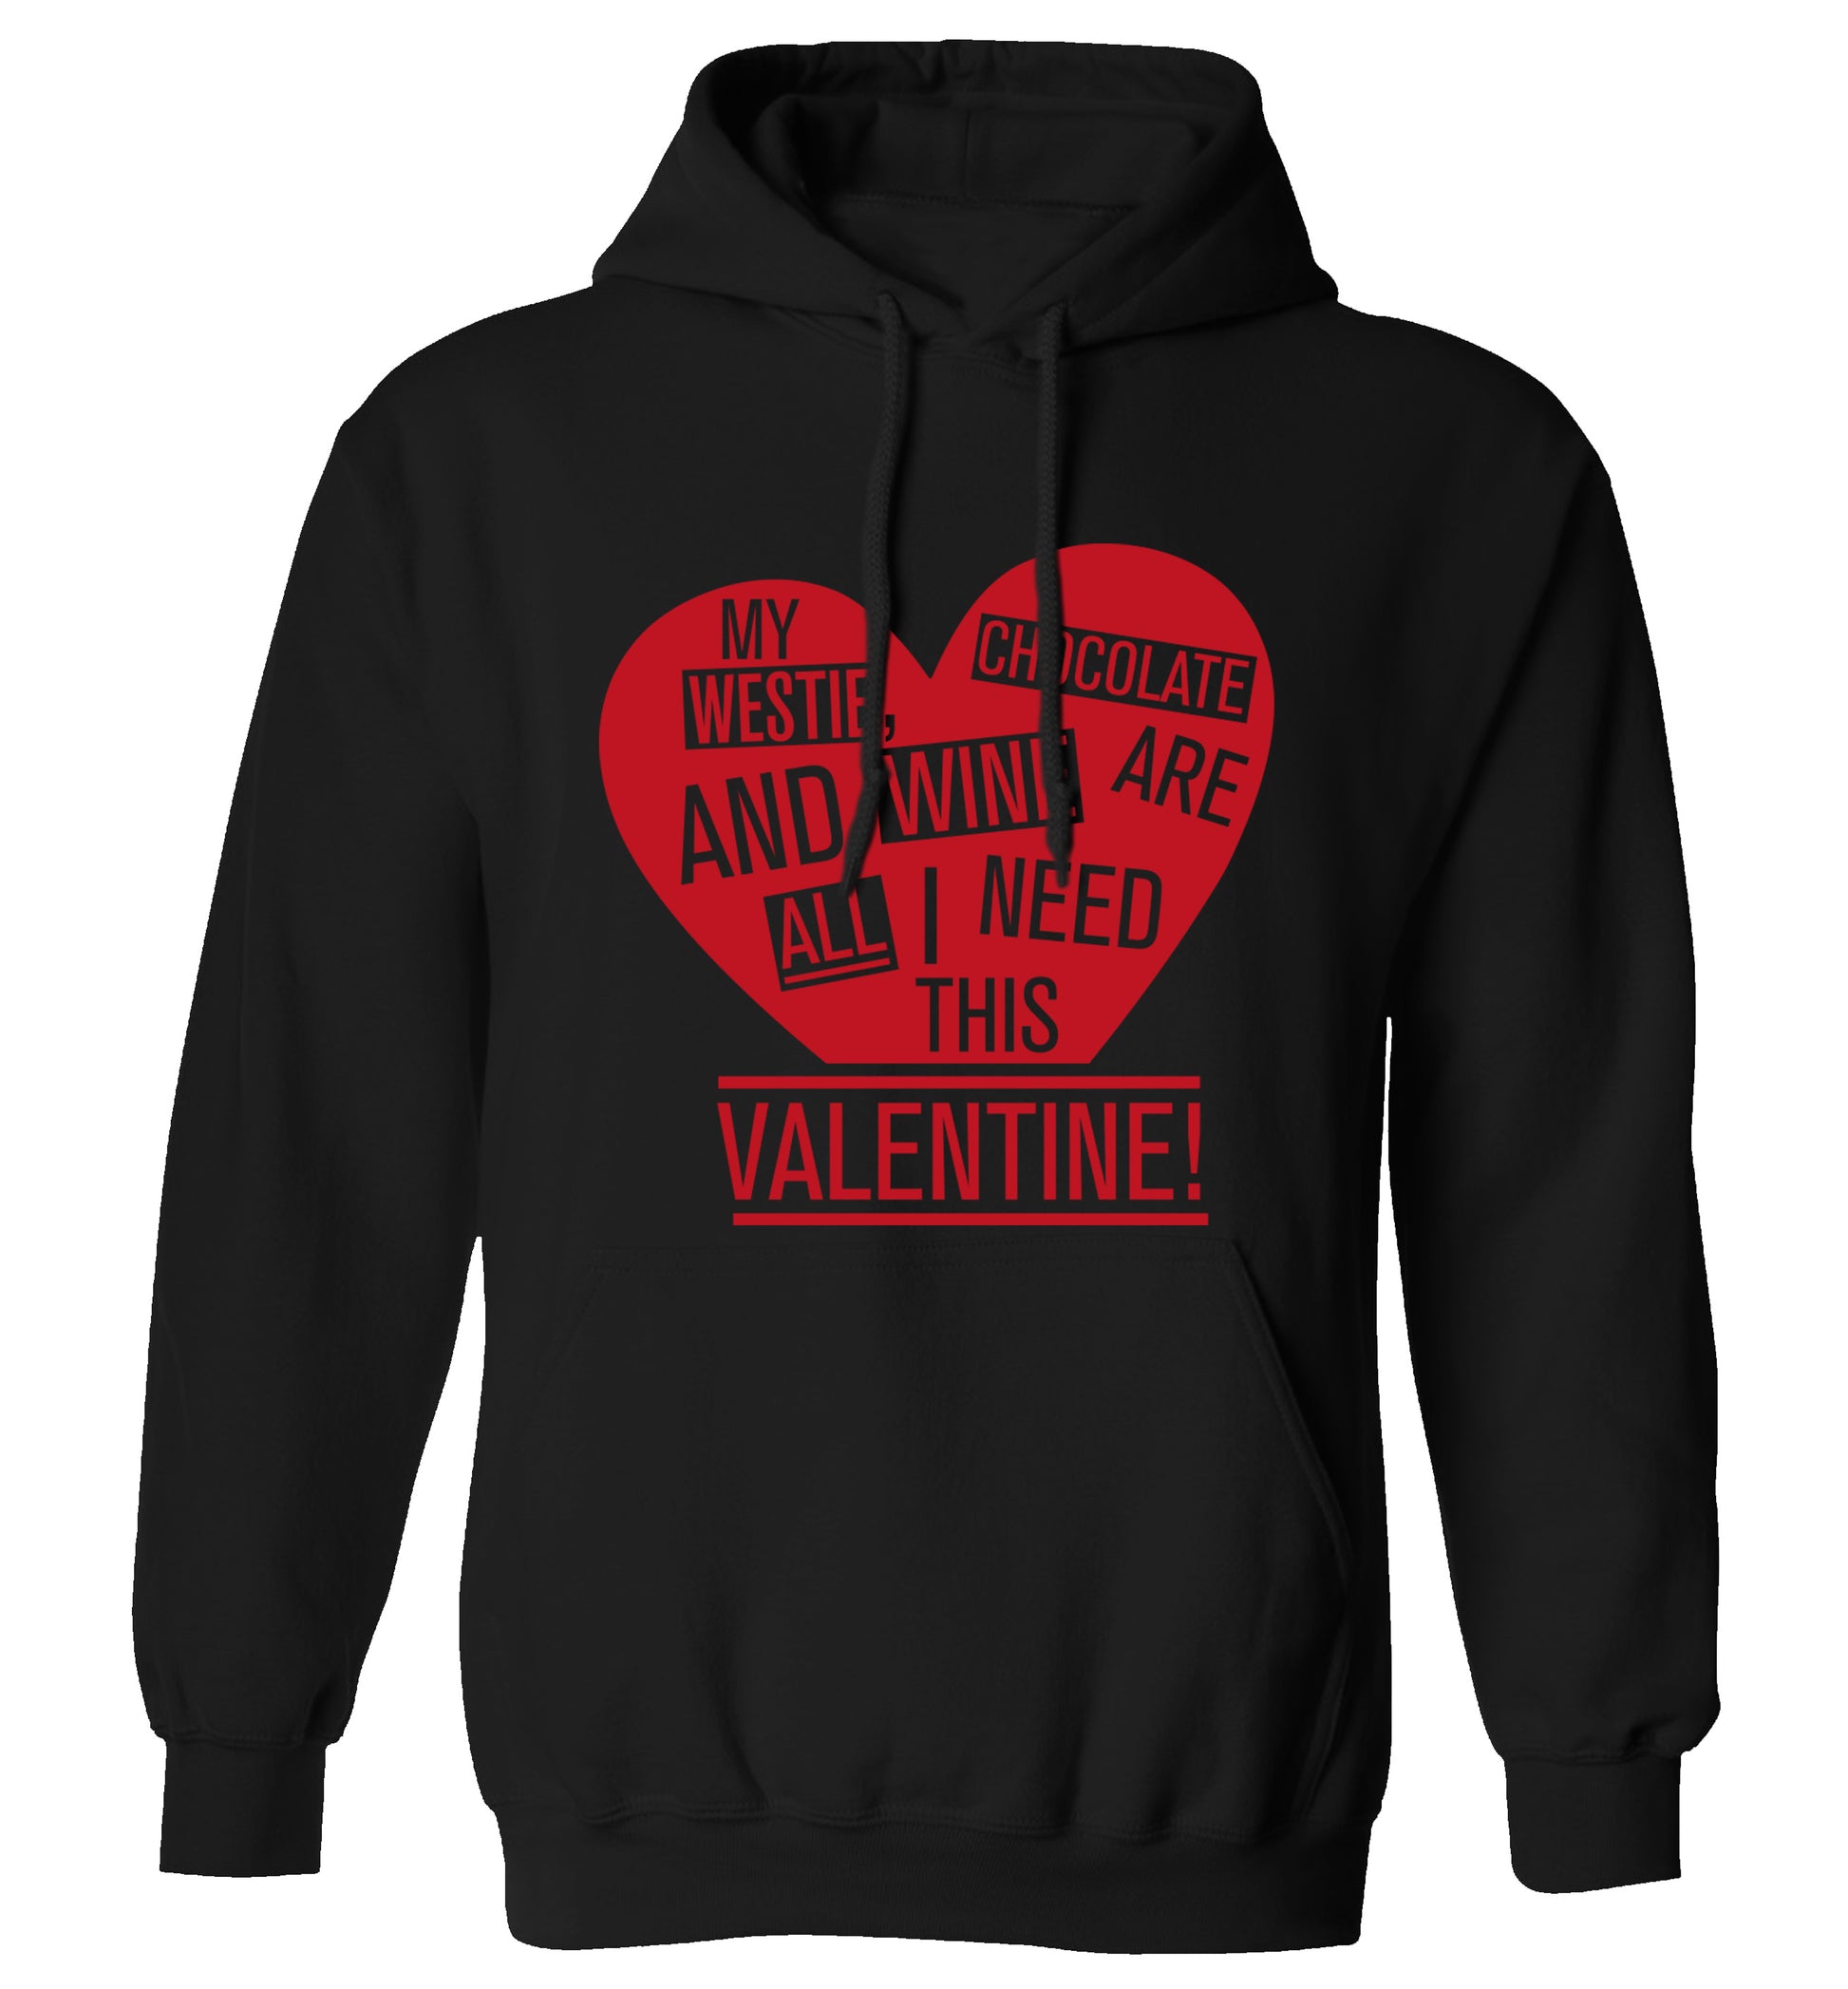 My westie, chocolate and wine are all I need this valentine! adults unisex black hoodie 2XL